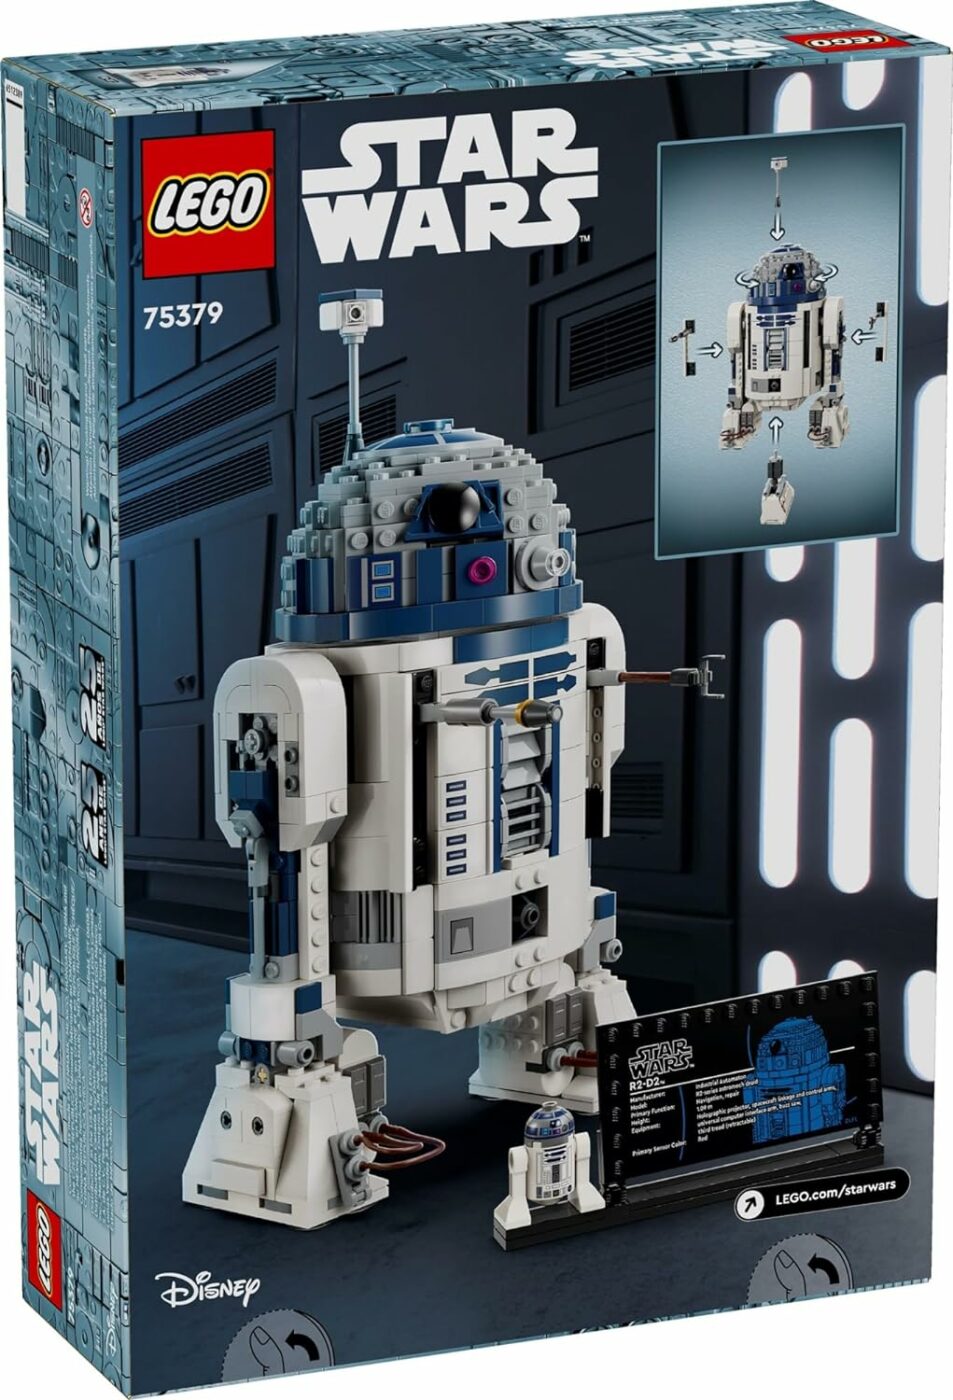 Entire lineup of LEGO Star Wars 25th anniversary set includes midi-scale Millennium Falcon, Tantive IV and the Invisible Hand!31